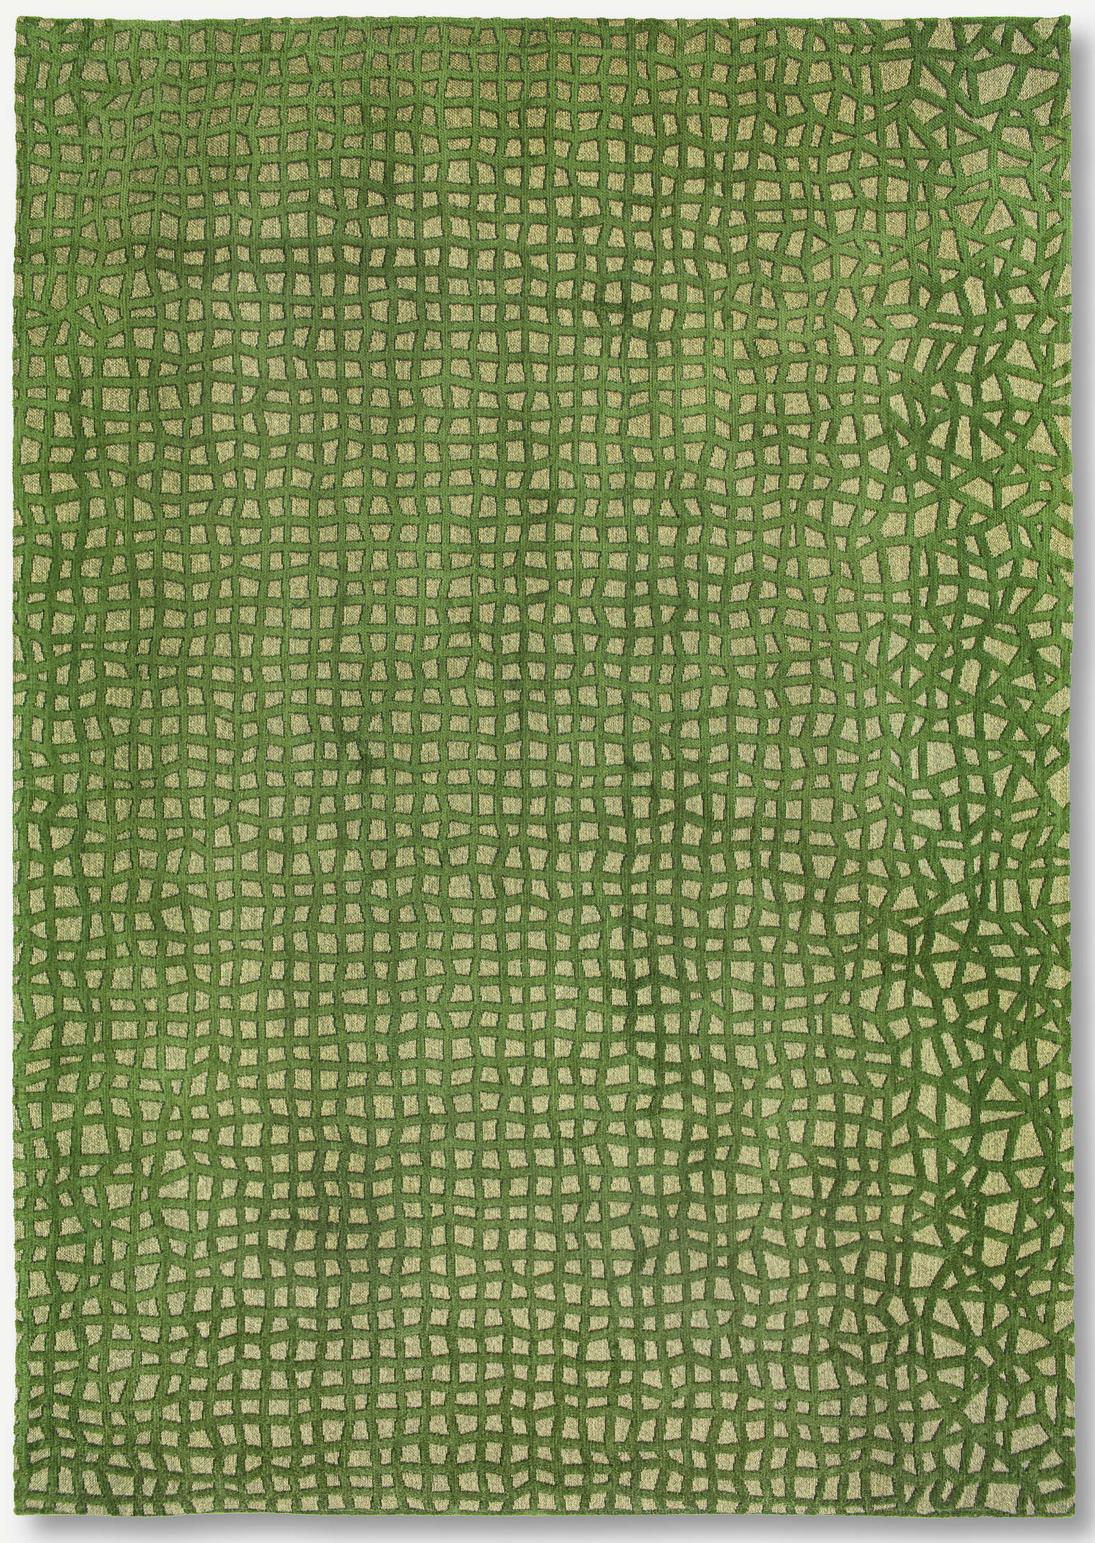 Green Checkered Flatwoven Rug ☞ Size: 6' 7" x 9' 2" (200 x 280 cm)